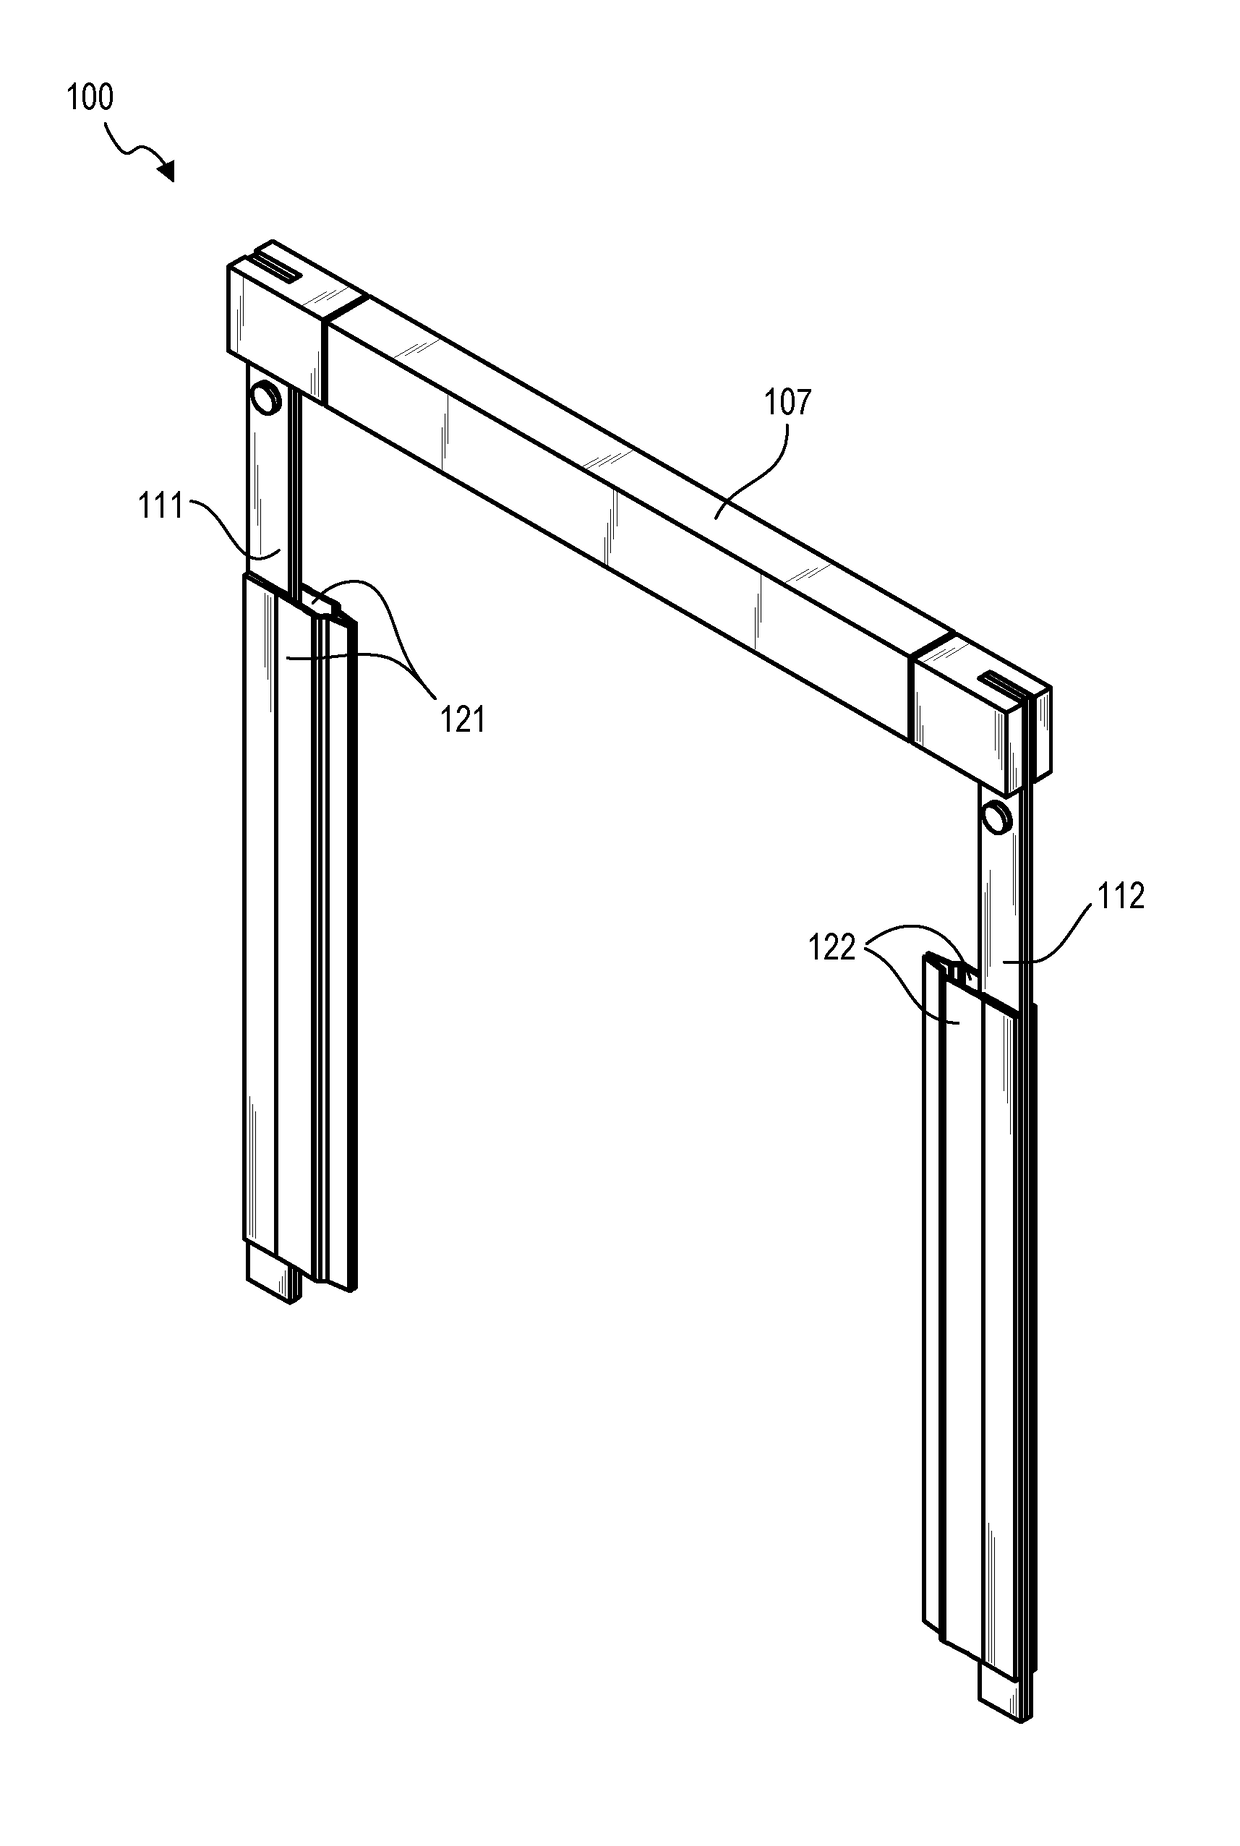 Workpiece holder for a wet processing system